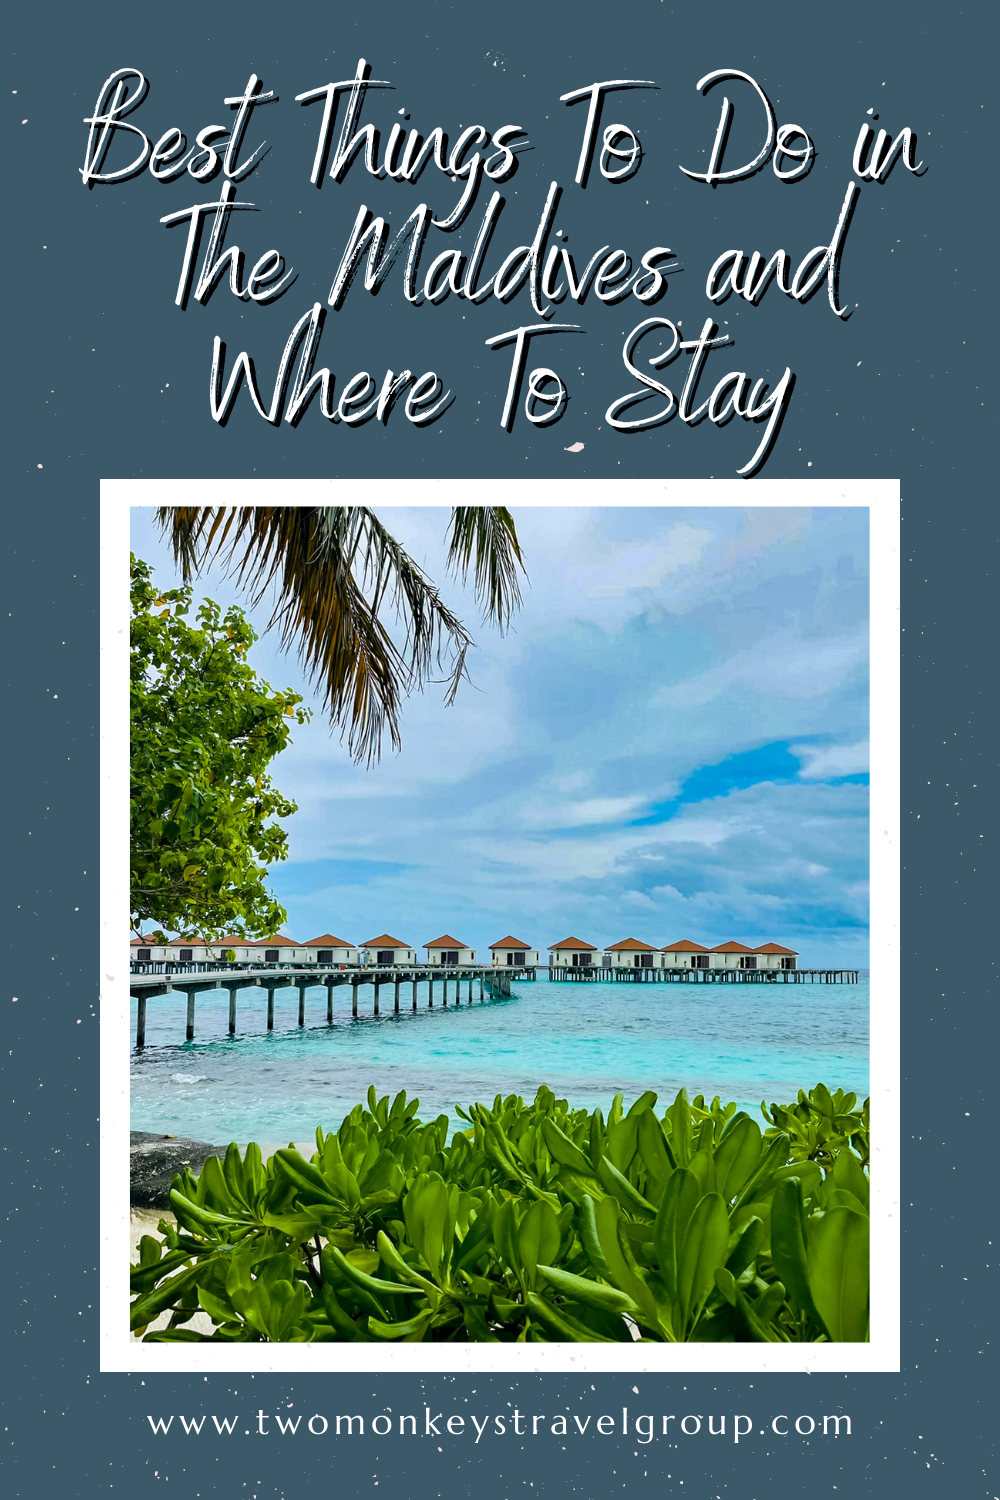 7 Best Things To Do in The Maldives and Where To Stay